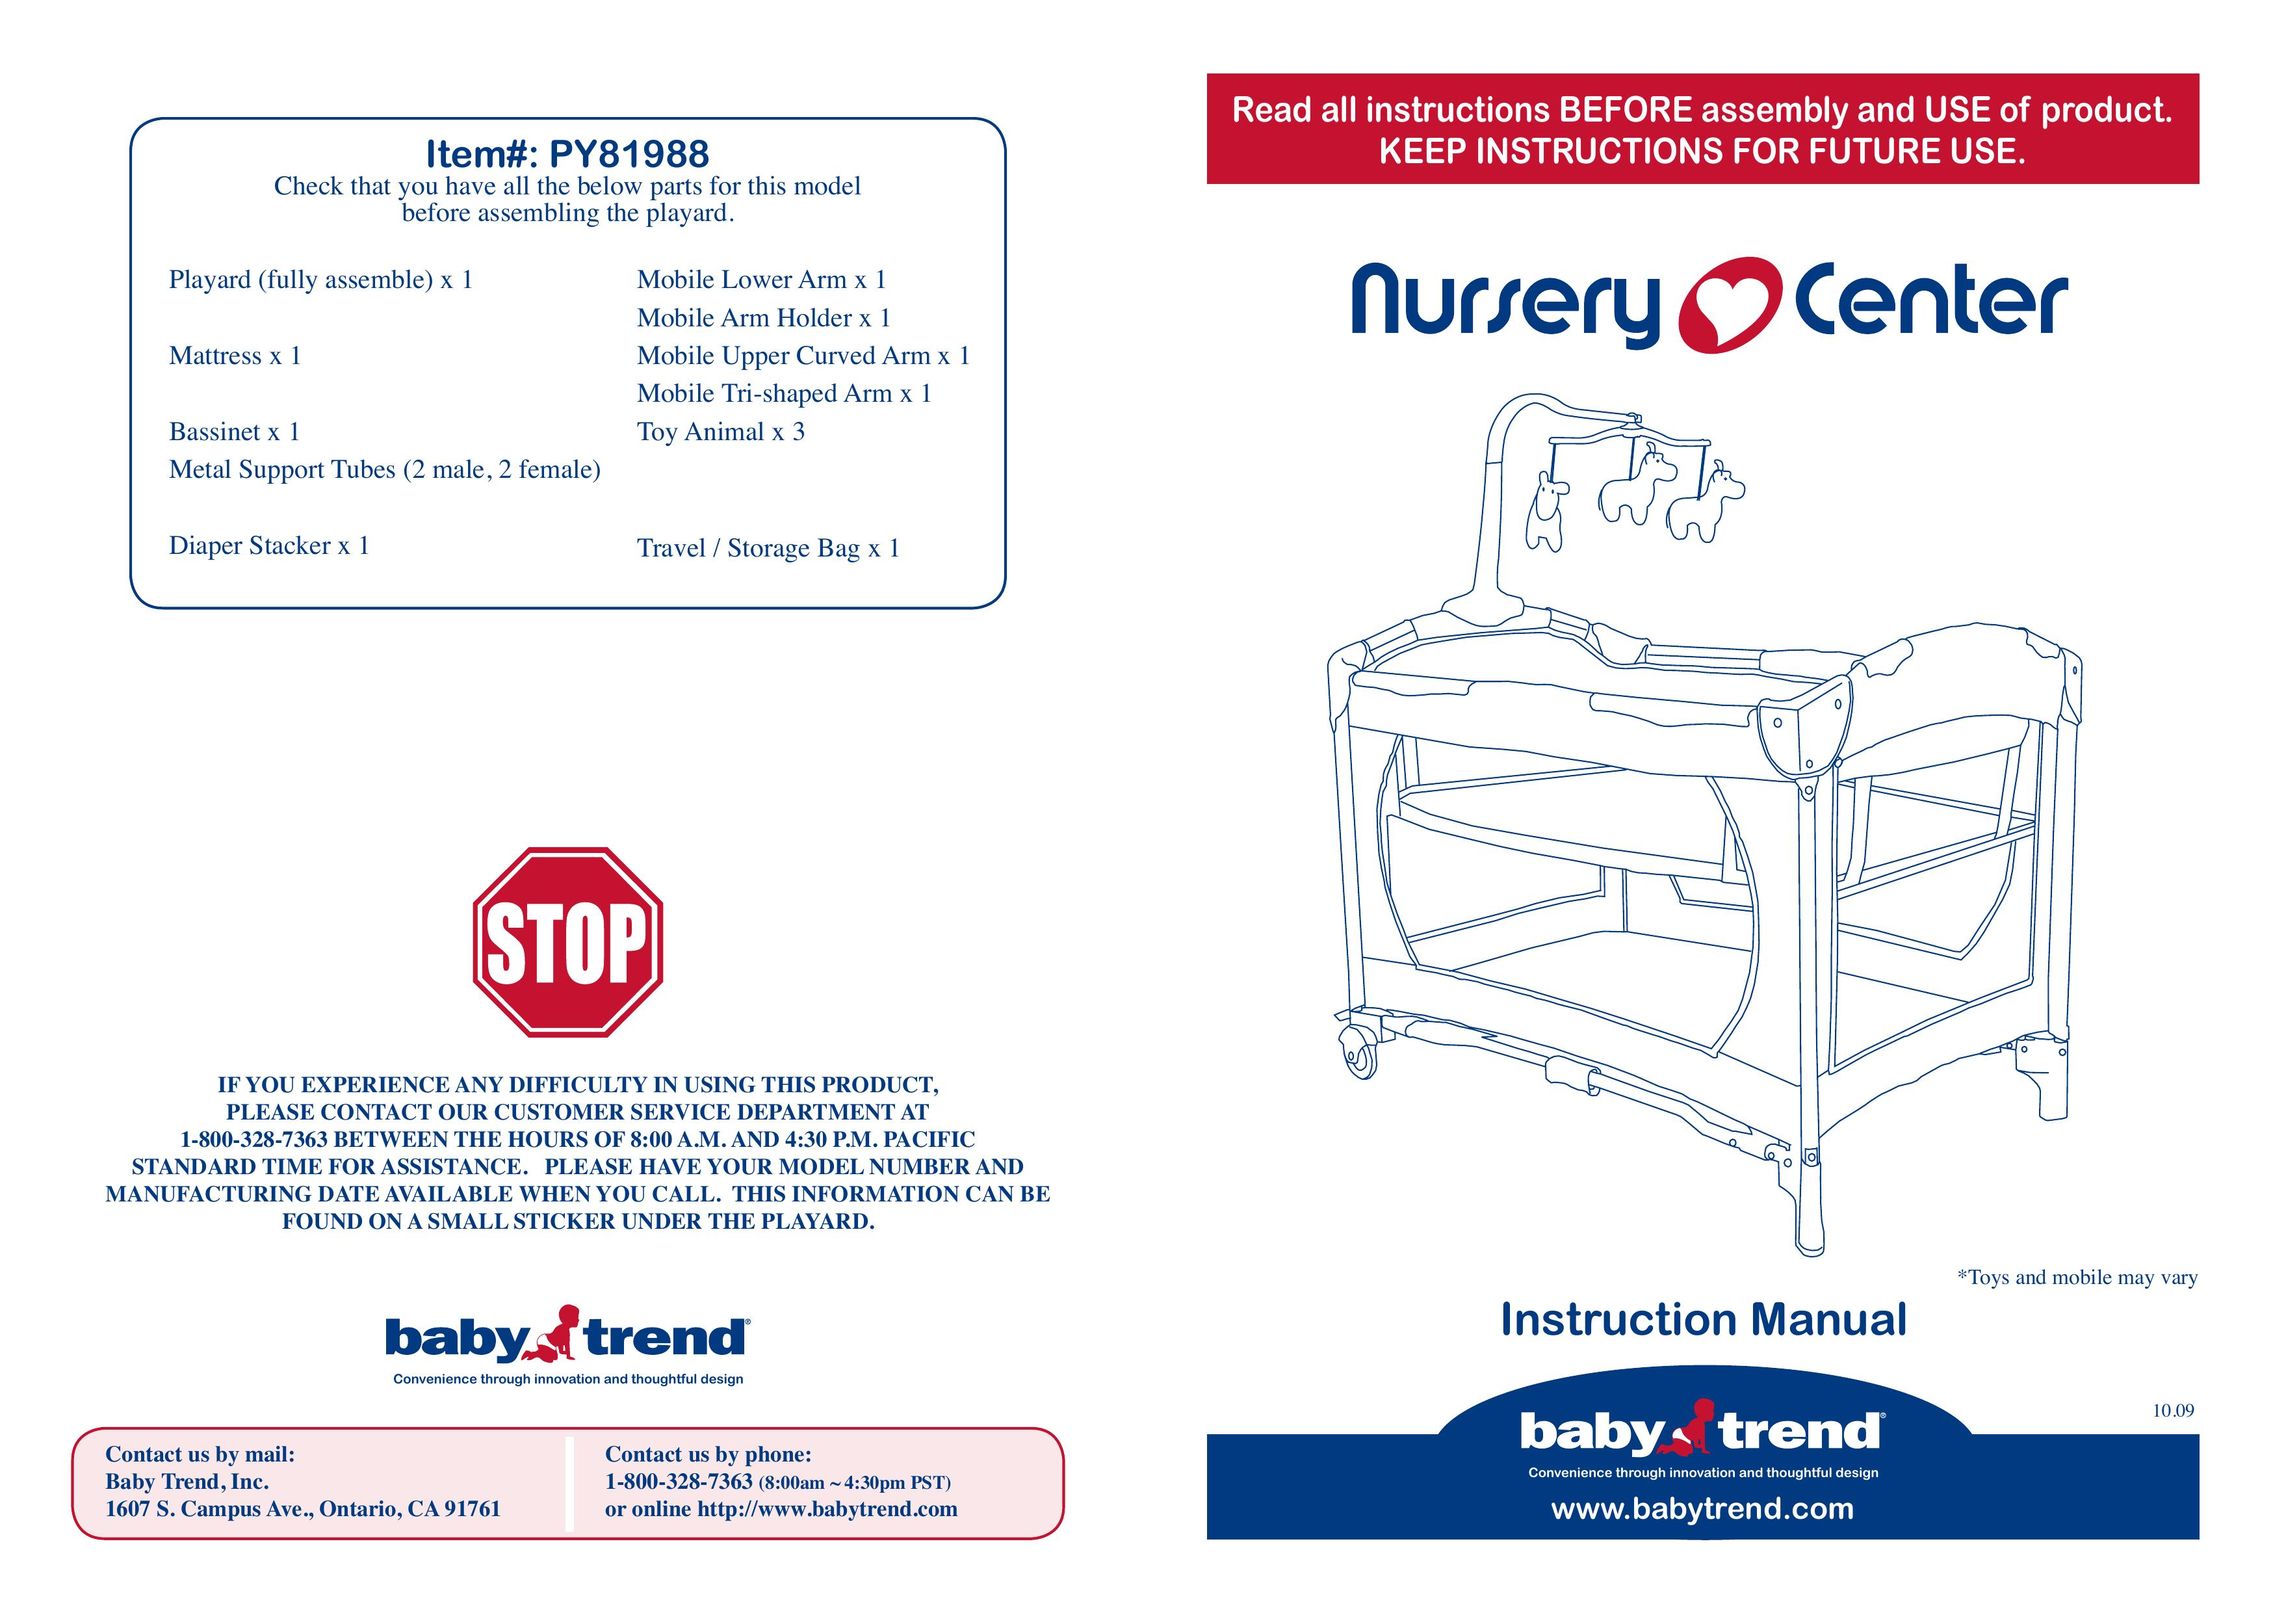 Baby Trend PY81988 Baby Furniture User Manual (Page 1)